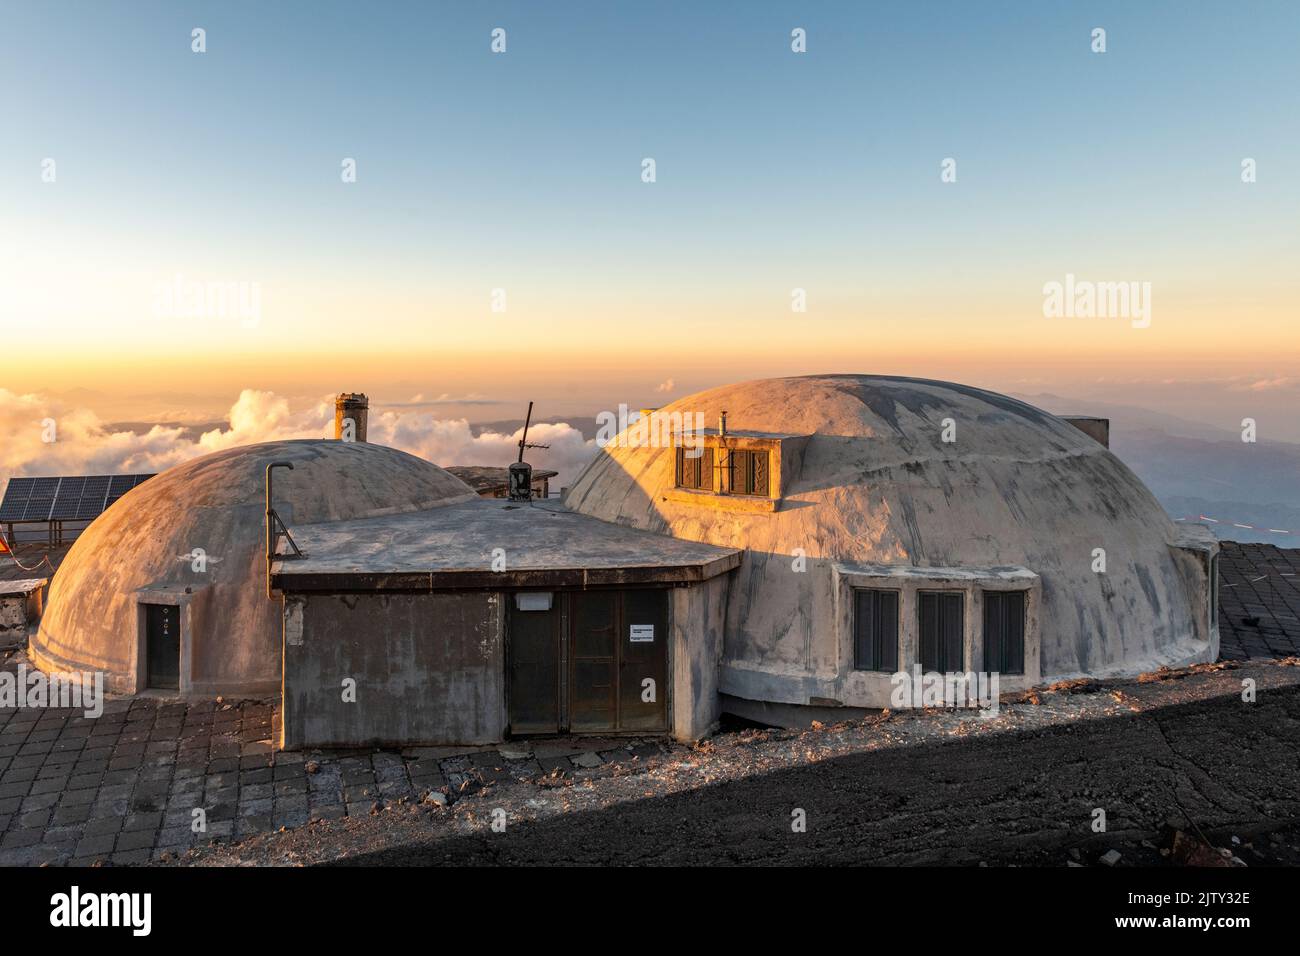 The volcanological observatory of Pizzi Deneri at 2800m on Mount Etna, Sicily, Italy, seen at sunset Stock Photo